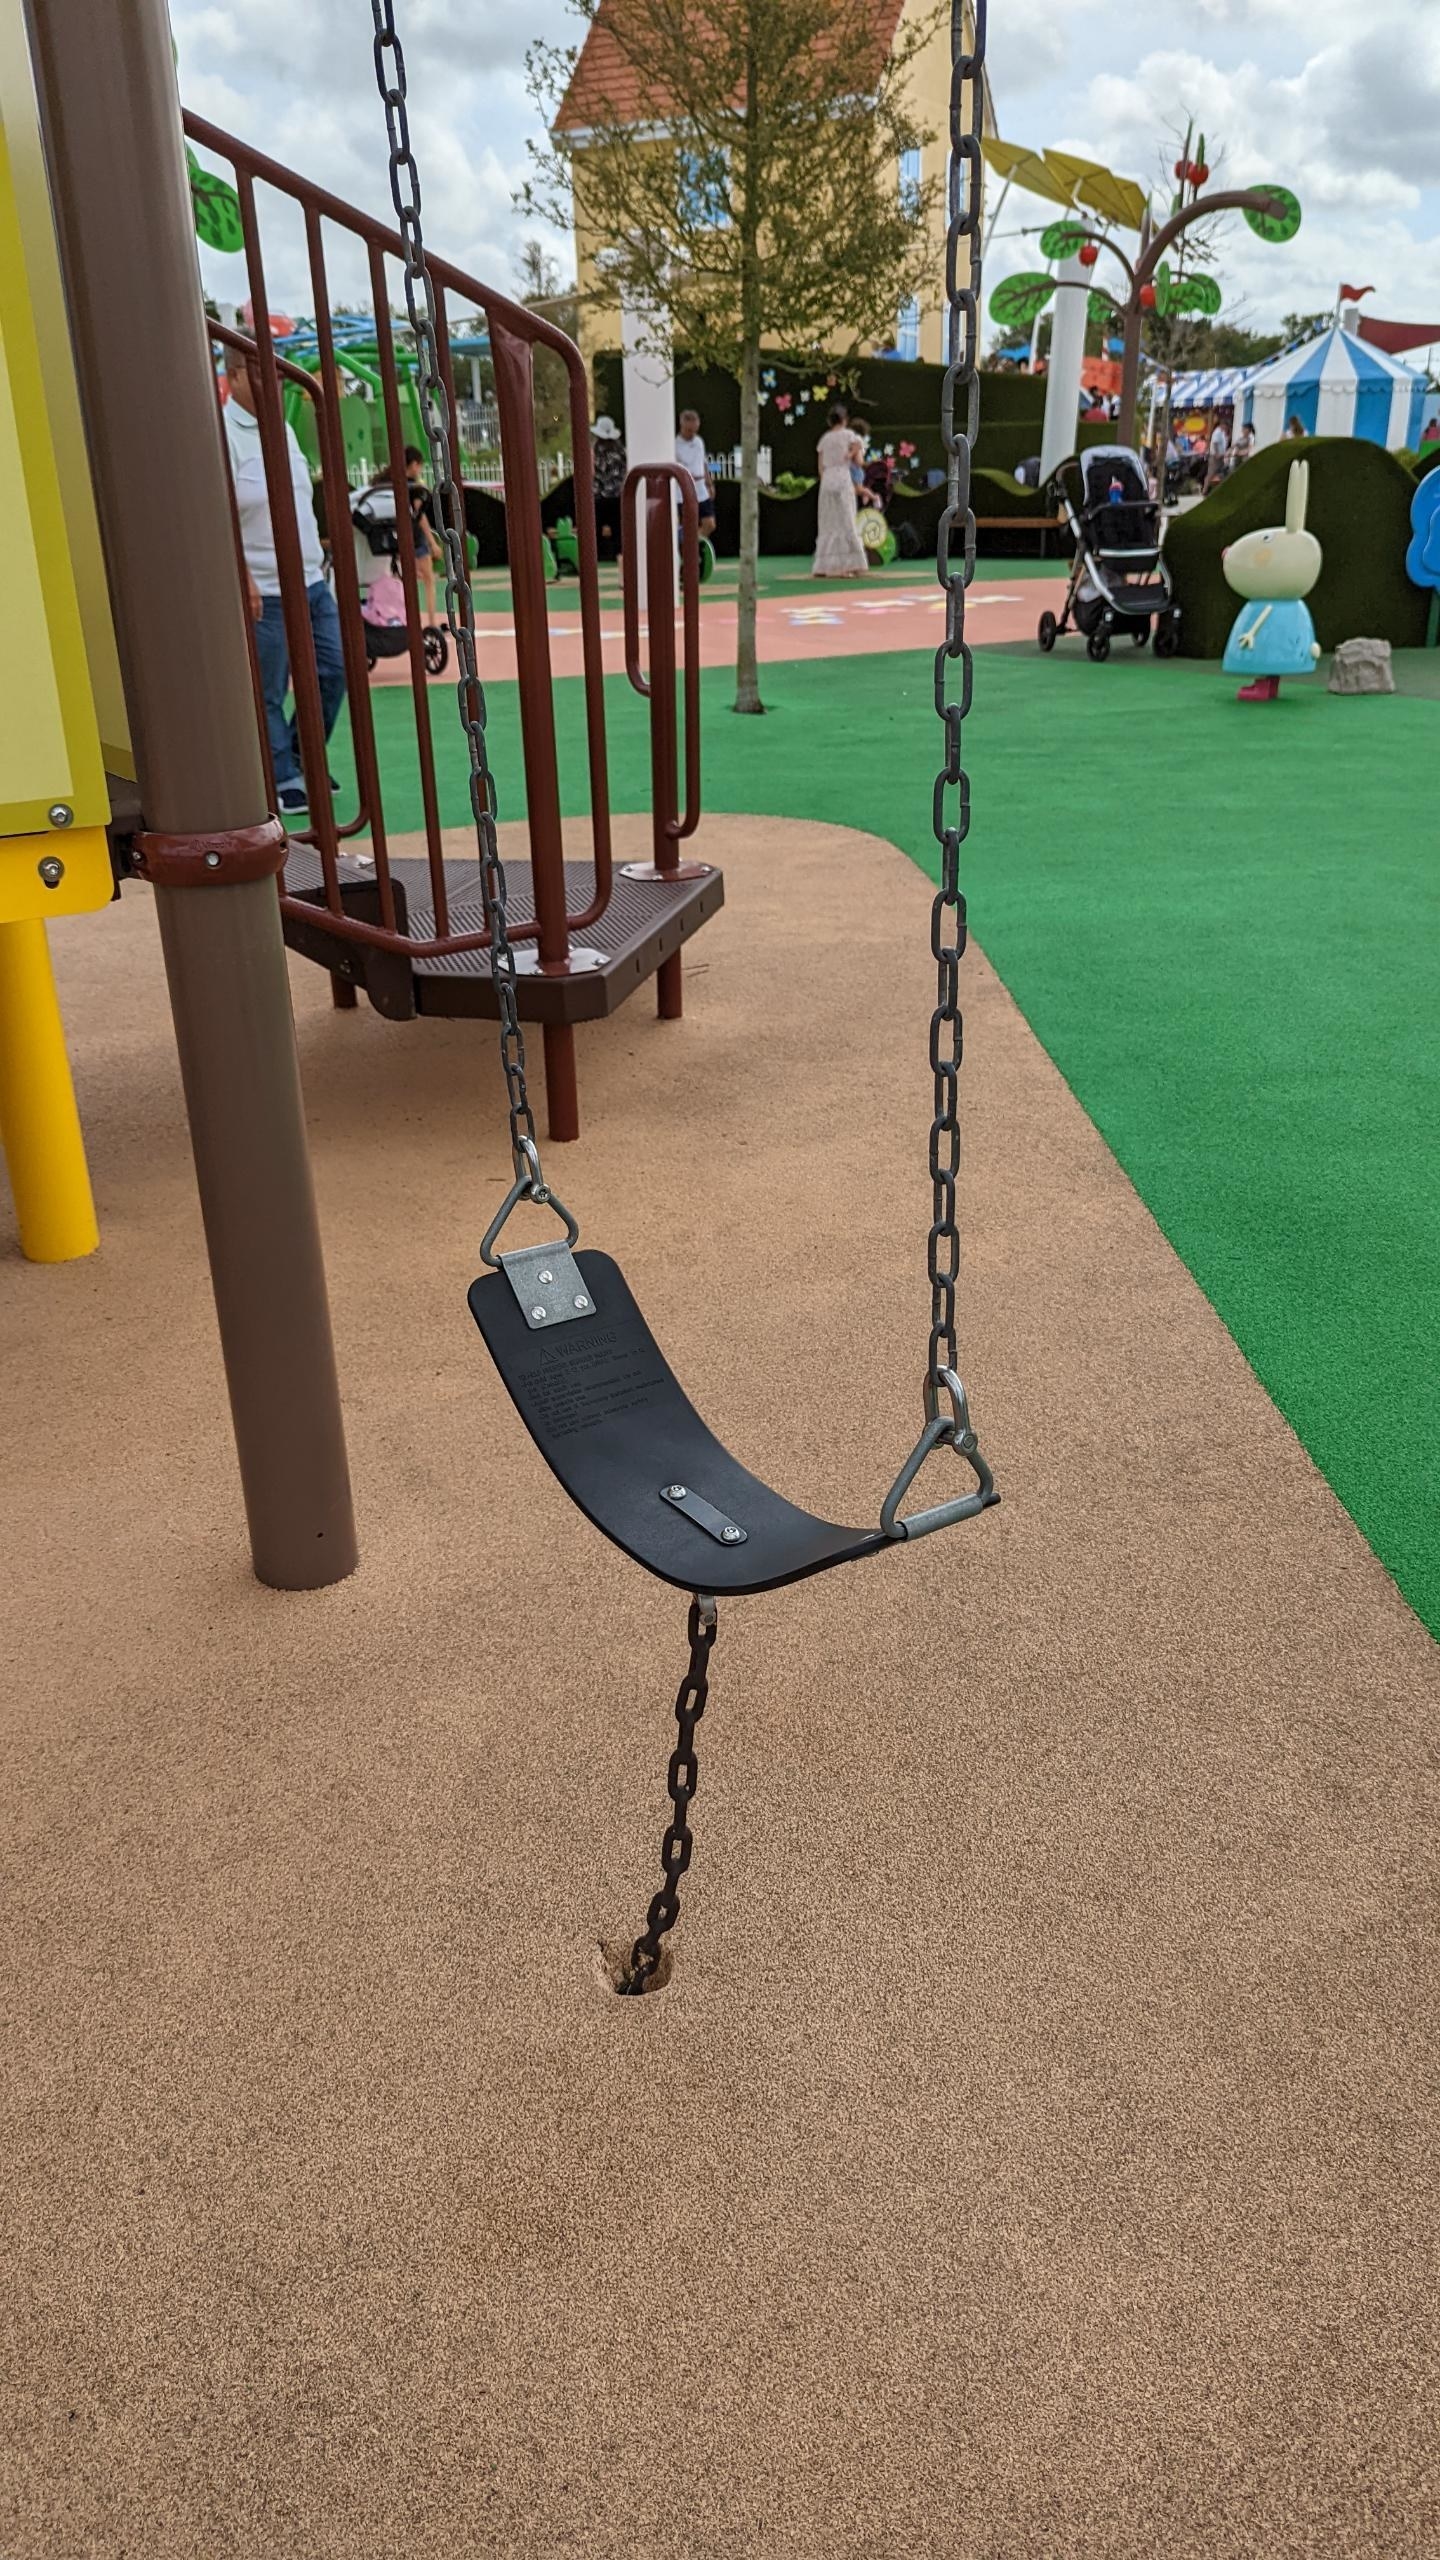 A swing with a chain that extends into the ground